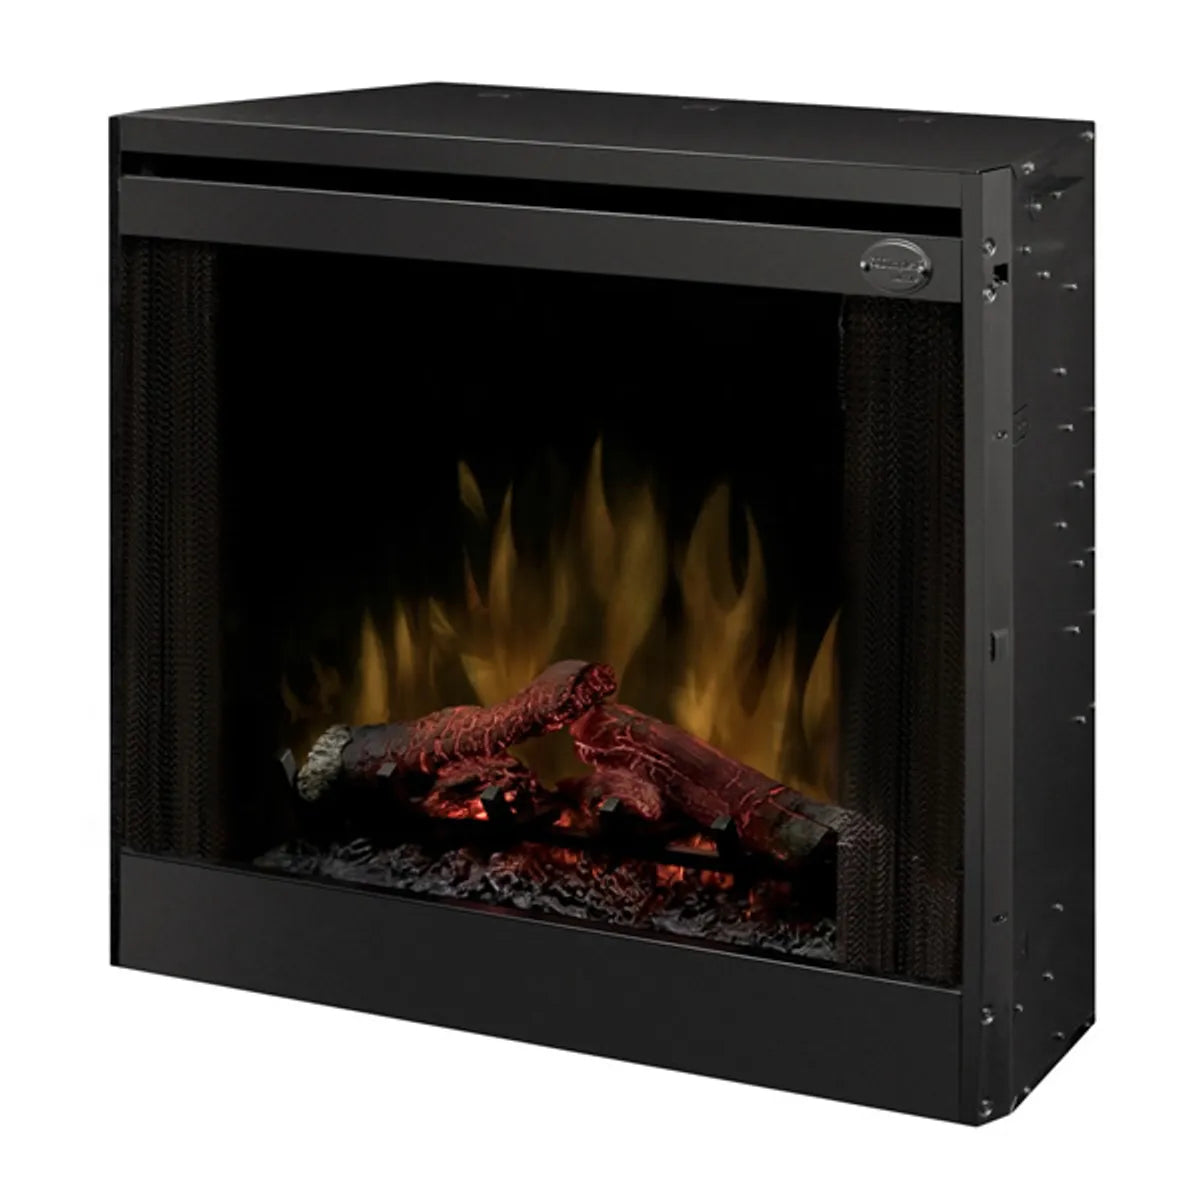 Dimplex Slim Line Built-In Electric Fireplace